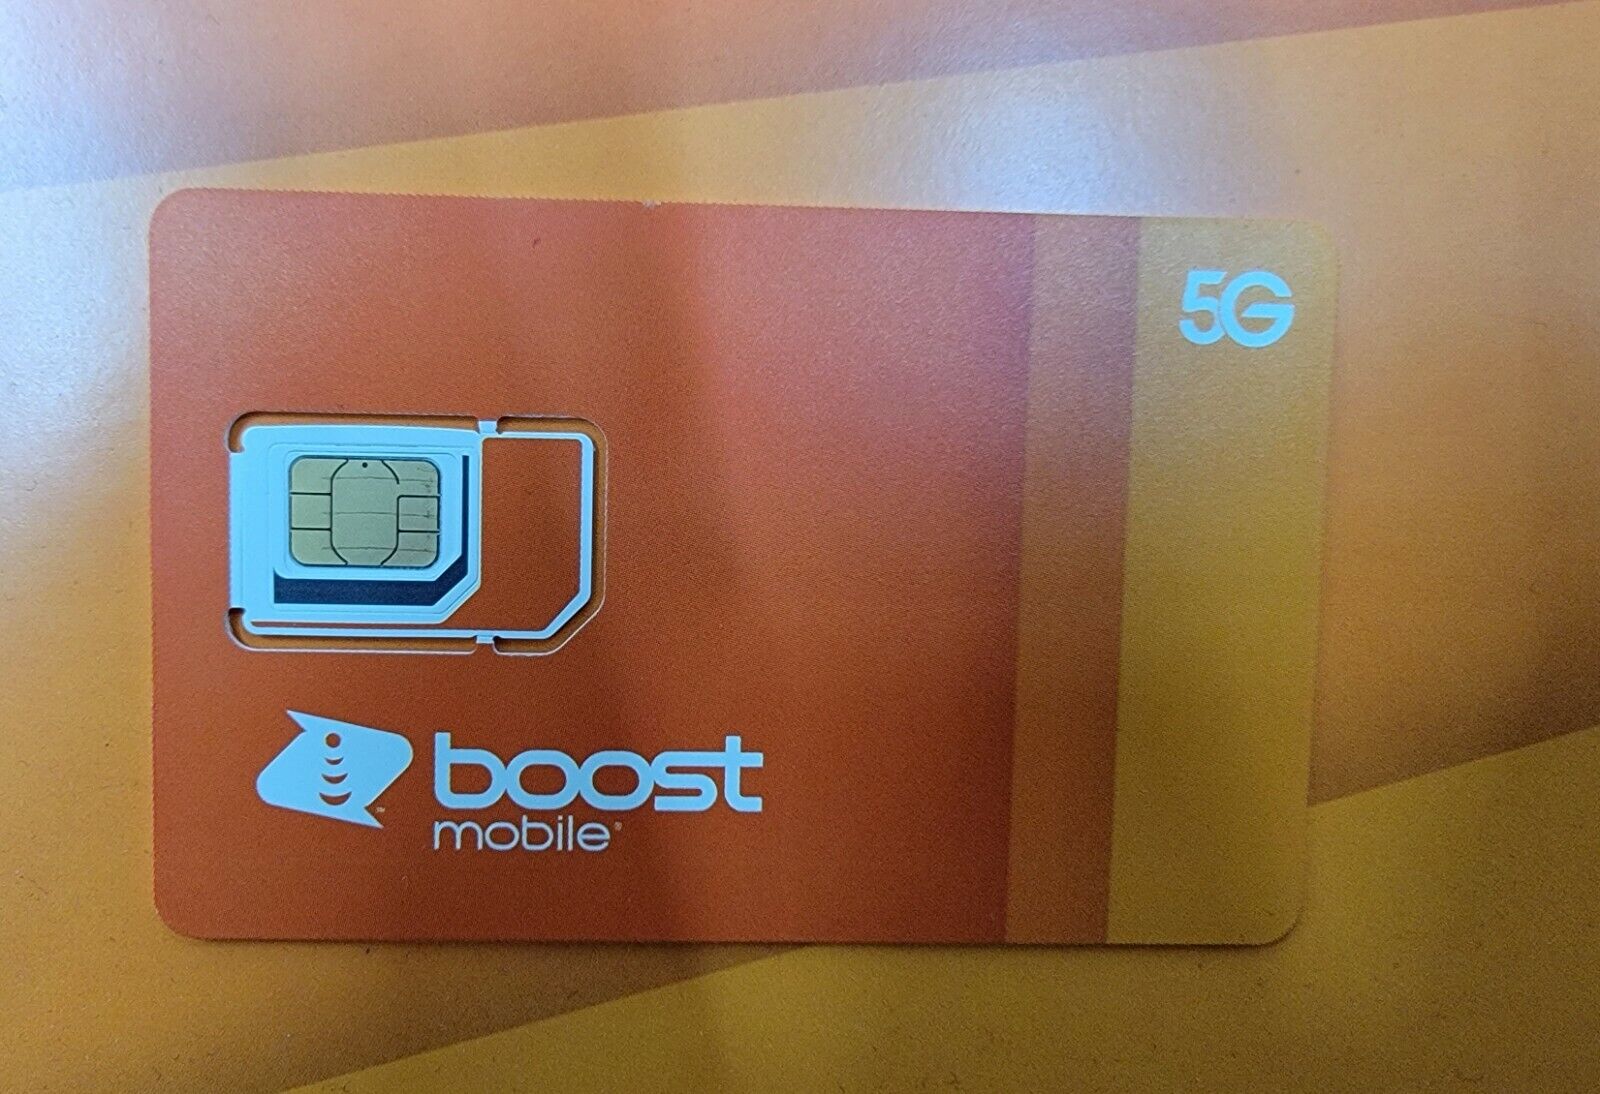 NEW Boost Mobile 5G Sim Cards- Expanded Network For iPhone & Android LOT OF 20 Boost Mobile